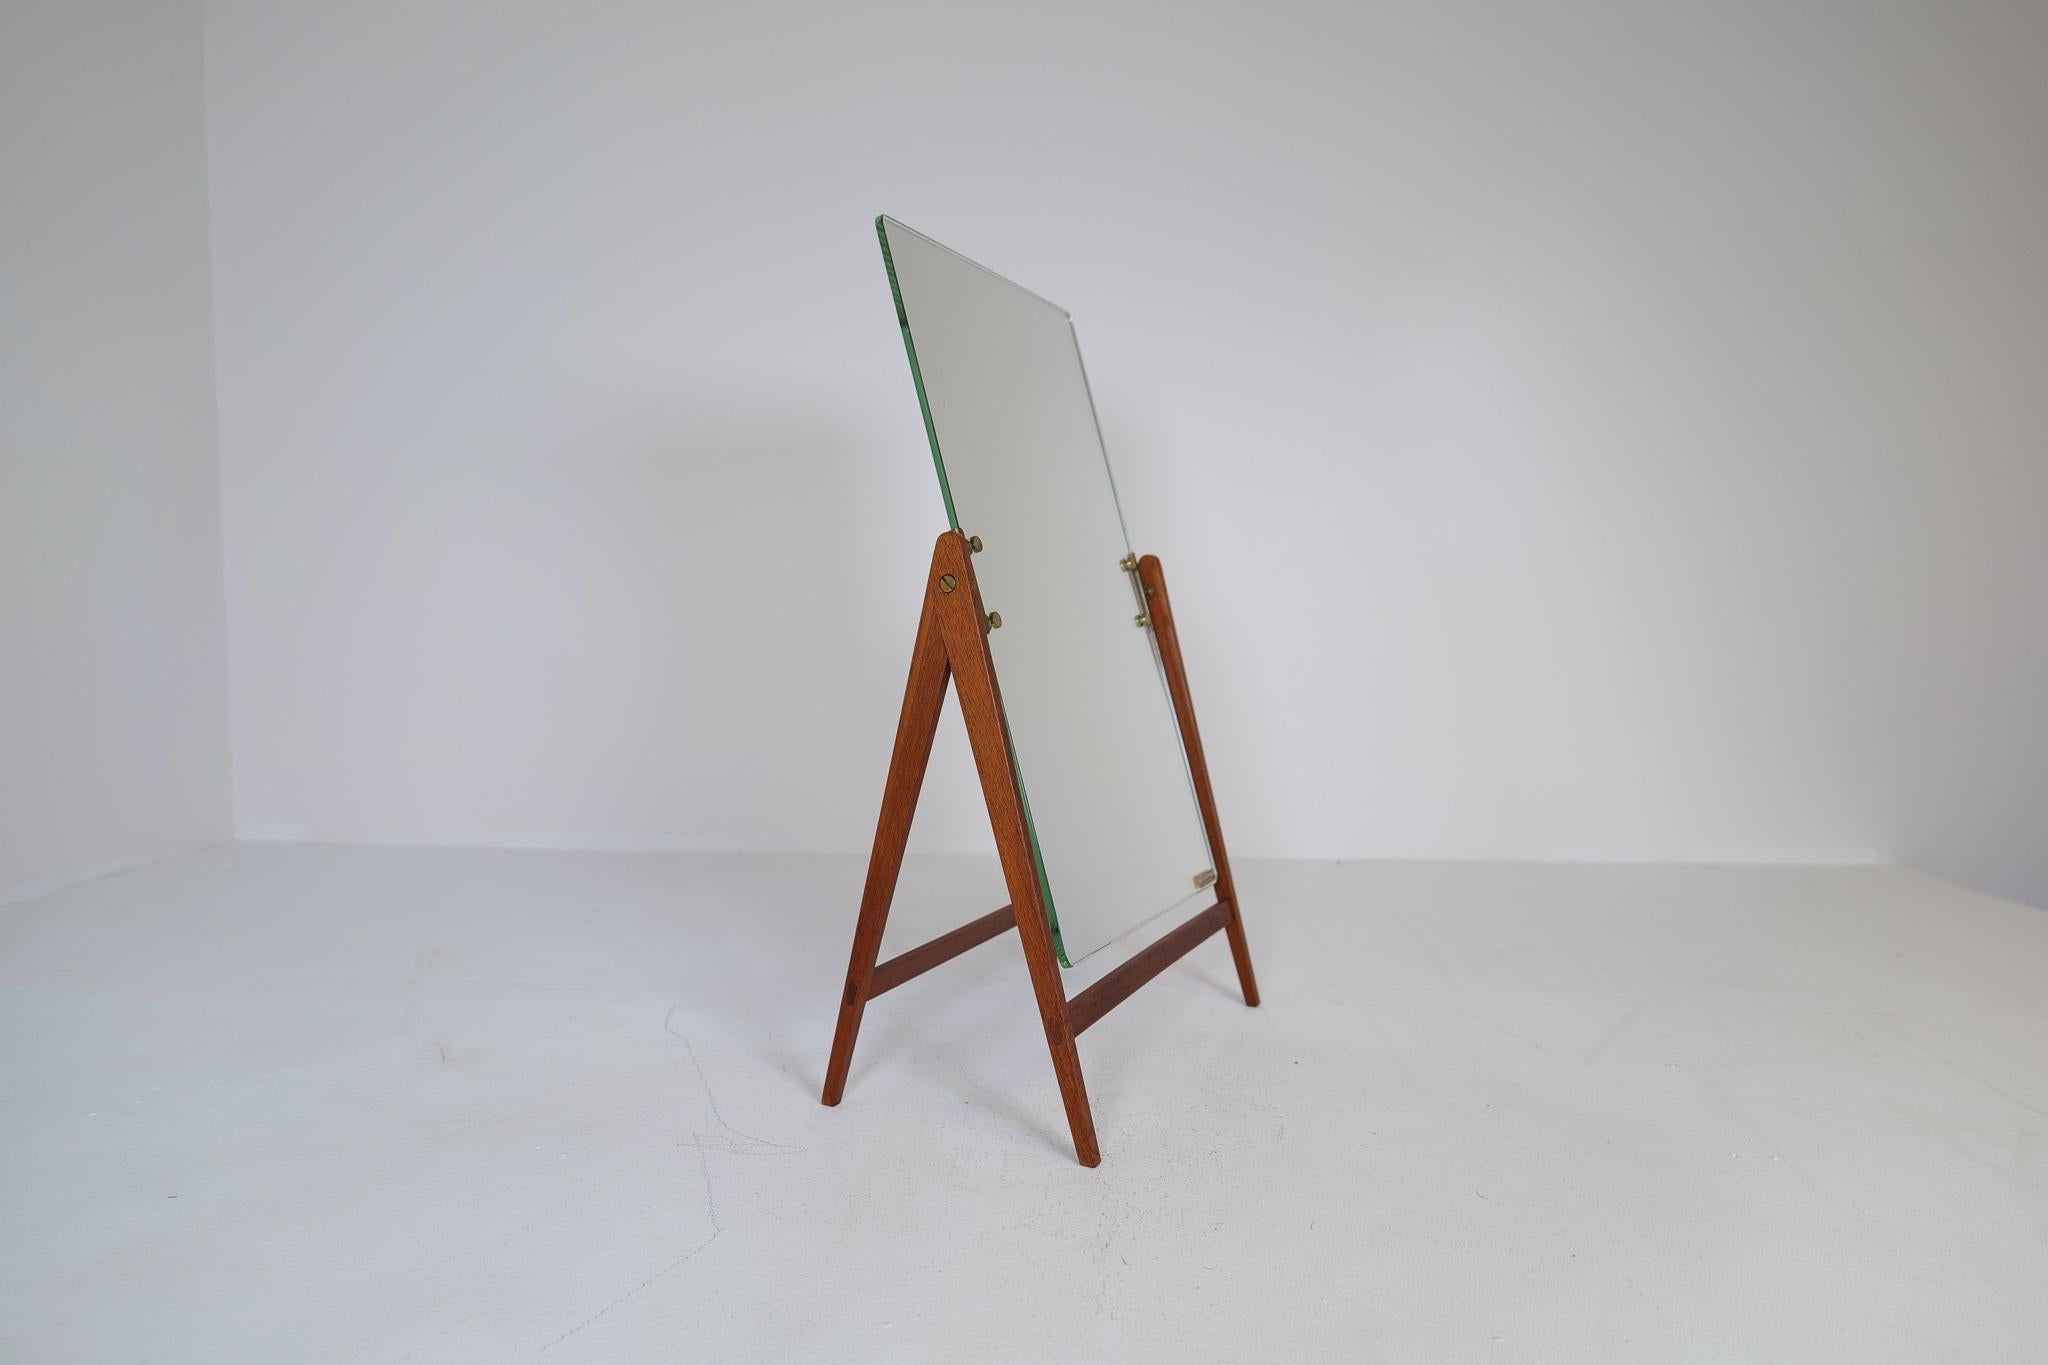 This rare mid-century table mirror in brass and teak was produced in Sweden at AB Markaryd and designed by Hans-Agne Jakobsson. The mirror stands on a teak foundation and has a swinging mode to be able to adjust the position. The brass details and